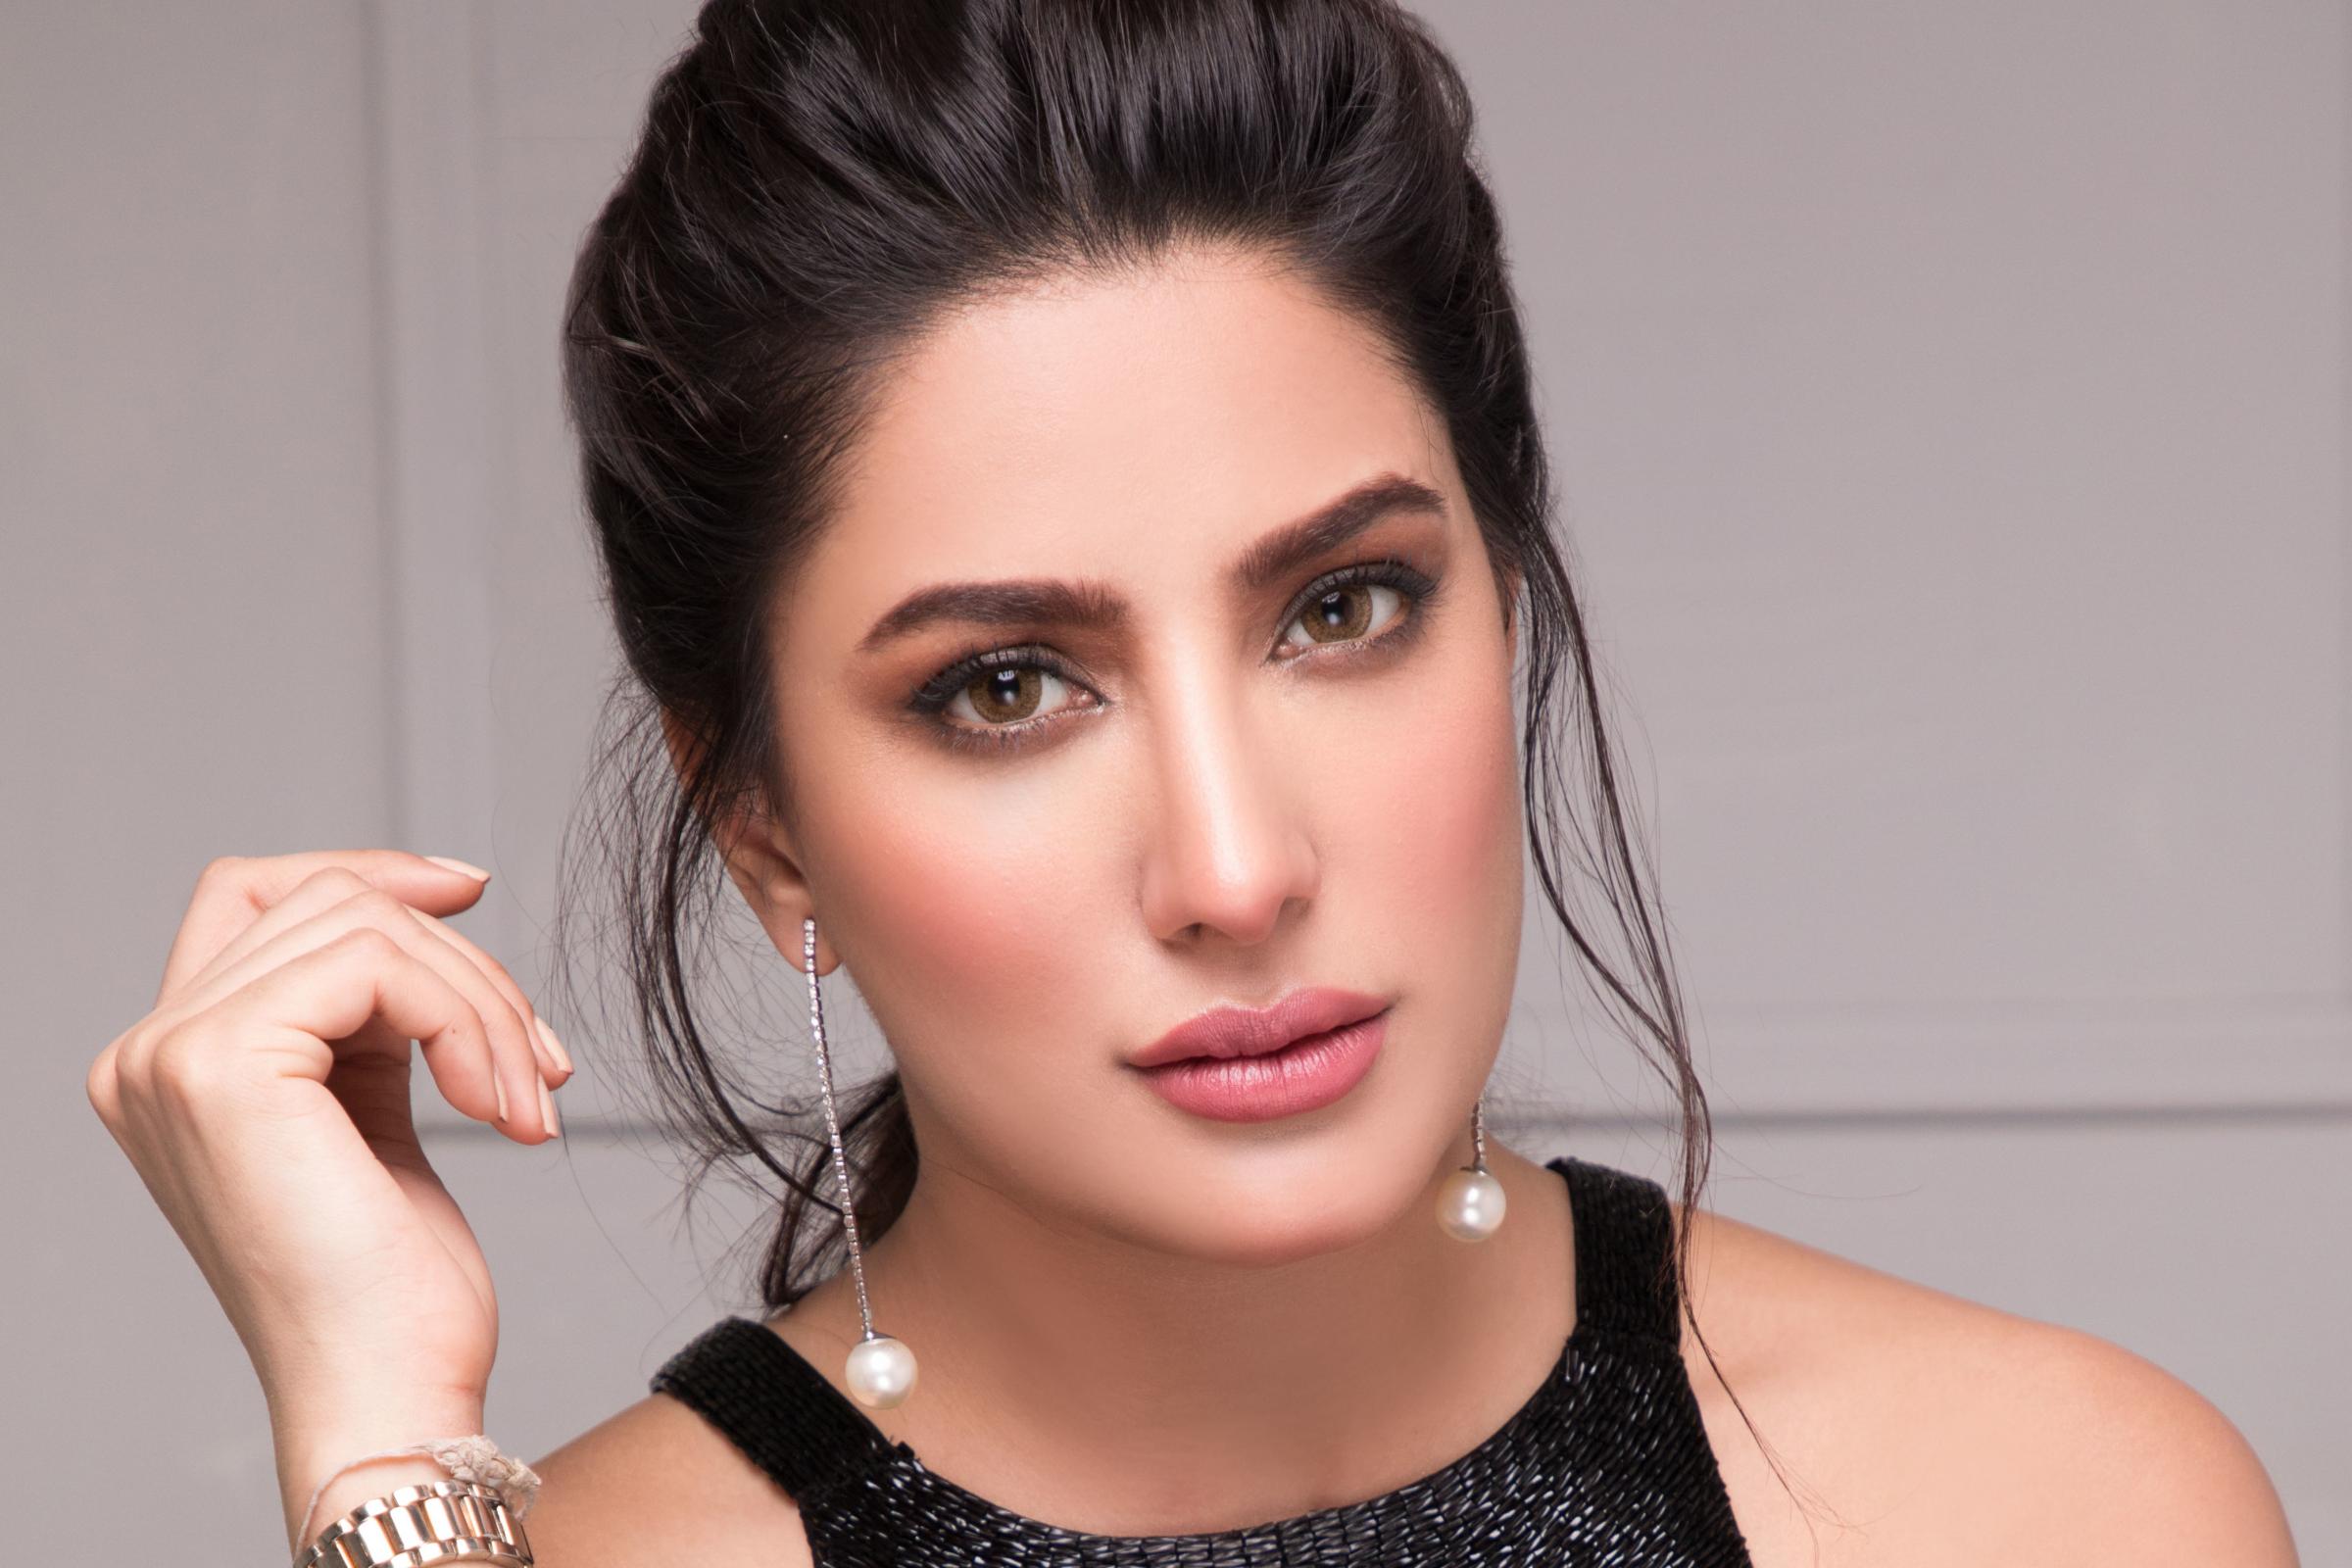 Mehwish Hayat Wants To Contest In 2028 Elections Mehwish Hayat is one of those celebrities who have proved their worth both in the acting and the humanitarian field. She hasn’t only received the accolade as an actress, but is the Tamgha-e-Imtiaz winner, the face of the anti-terrorism campaign in Pakistan, and has also received a special international award from the United Nations (UN) in America. All of this hint at her being capable to become a good politician willing to serve people, and we think that might be coming true. About Entering Politics In 2028 All of her credentials point that Mehwish is credible to contest in elections. In an interview with the UK-based website, she hinted that she may stand in the 2028 General Elections of Pakistan. A Twitter user, in 2019, jokingly said that she had made a giant leap towards Premiership for 2023. To respond to this, Mehwish jokingly stated in 2028. Some of her fans even went on to create a poster for 2028 based on the Obama campaign. The poster described her as the ‘Qaum Ki Awaaz’. She said that she has a lot to learn, but she has eight years to learn and consider herself for the position. “I would like to say that I love the power that comes with politics – don’t get me wrong, I am not some sort of megalomaniac. “For me, politics is about being in a position to make a difference in the lives of people.” What’s Important In Politics For Her? When talking about what’s important for her in terms of politics and raising the voice and what differentiates her from others, she said: “I feel that I understand what the needs and worries of the average people are. “It is really touching that they reach out to me on social media and ask me to highlight issues of concern to them. “I also am a fighter, once I get my teeth into something, I will not let go till I achieve it.” Talking About The Role of Women Mehwish was appointed ‘Goodwill Ambassador for Girls’ by the Ministry of Human Rights. Talking about the future of the country concerning women leading it, she continued: “I think that it is impossible for me to contemplate any sort of future for Pakistan without the involvement of women. “We are no longer the image that films and dramas unfortunately still show us as. Women in Pakistan are CEOs, fighter pilots, doctors, politicians, engineers, and are in every single profession. “Pakistan will stagnate if women are not part of its future development.” This clearly shows how strong of a person Mehwish Hayat is when it comes to opinions, and we hope she contests in politics in the years to come. We will be rooting for her. 